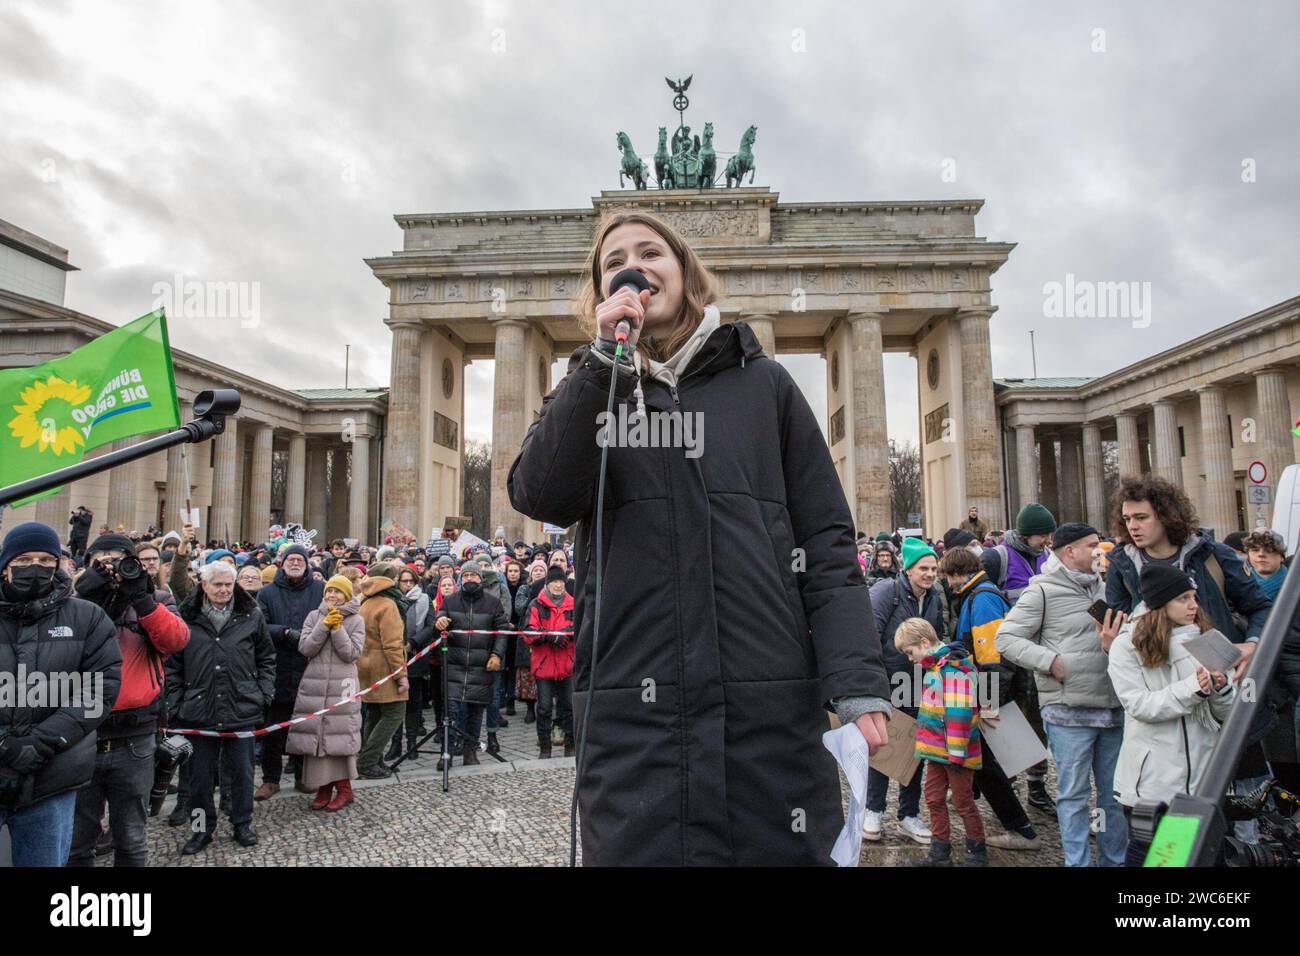 Berlin, Germany. 14th Jan, 2024. Luisa Neubauer delivered a speech at the protest. Neubauer, born on April 21, 1996, in Hamburg, is a prominent German climate activist and publicist known for leading Germany's Fridays for Future movement. As a significant figure in climate activism, Neubauer advocates for policies aligned with the Paris Agreement and has been a vocal proponent of Germany's transition from coal by 2030. Her Alliance 90/The Greens and the Green Youth membership reflects her deep commitment to environmental issues. In an unparalleled show of solidarity, the streets of Berlin on Stock Photo